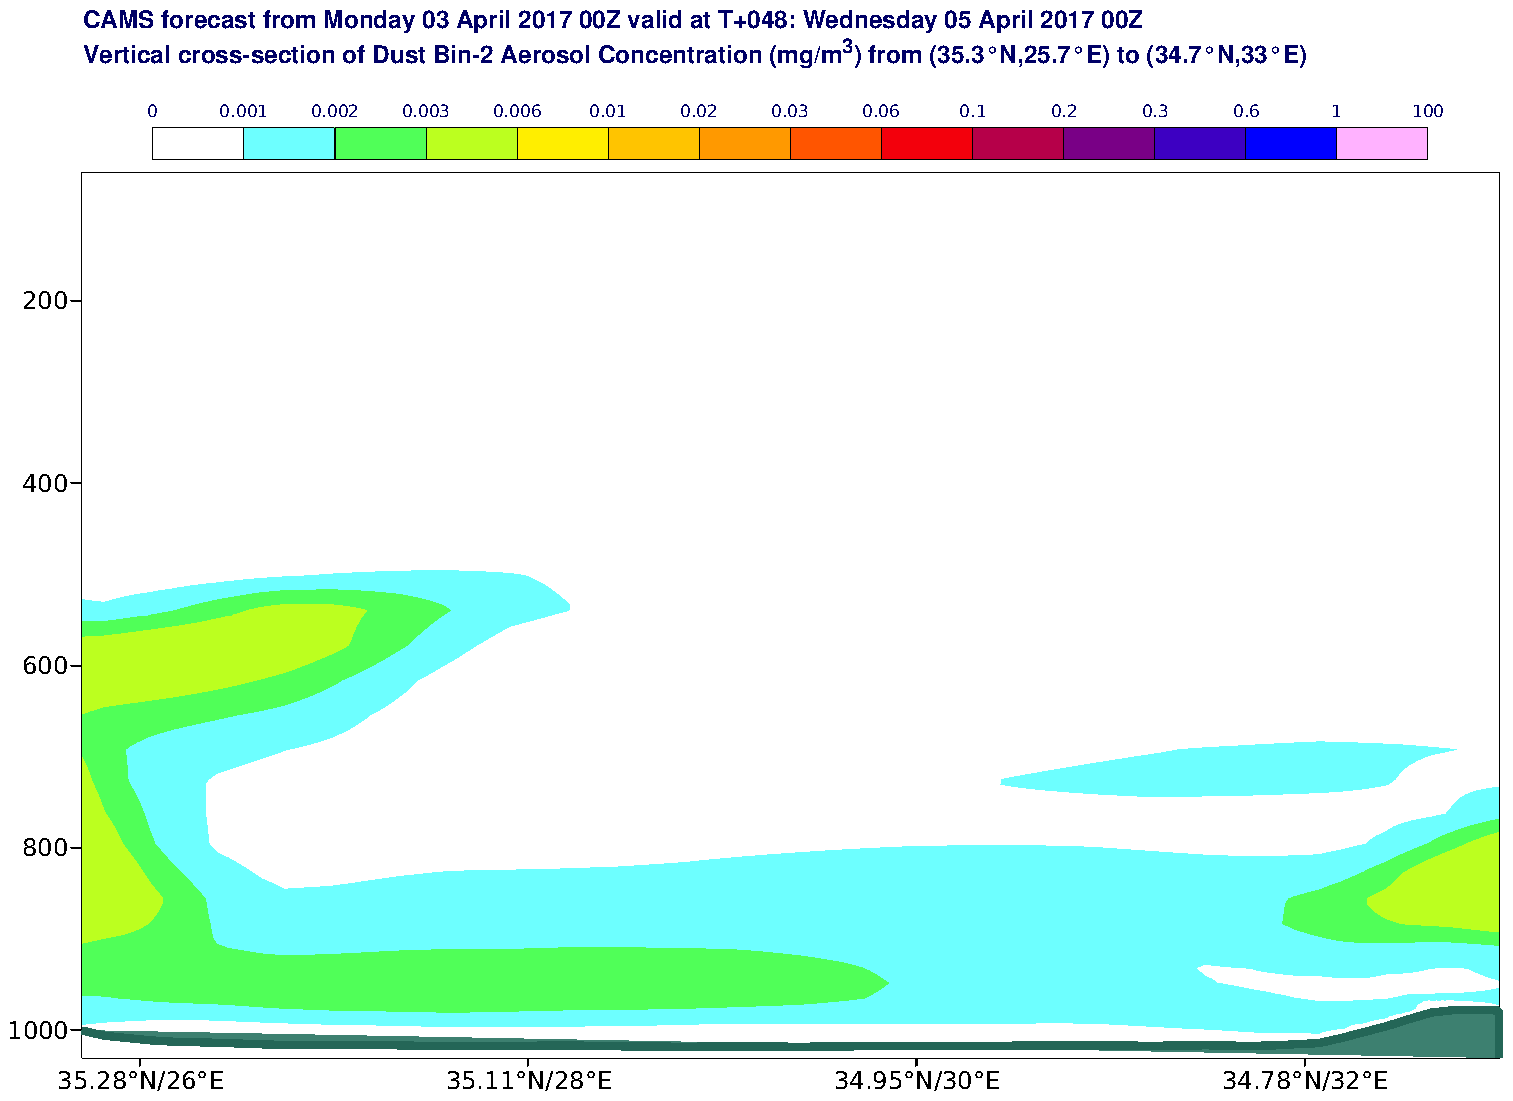 Vertical cross-section of Dust Bin-2 Aerosol Concentration (mg/m3) valid at T48 - 2017-04-05 00:00